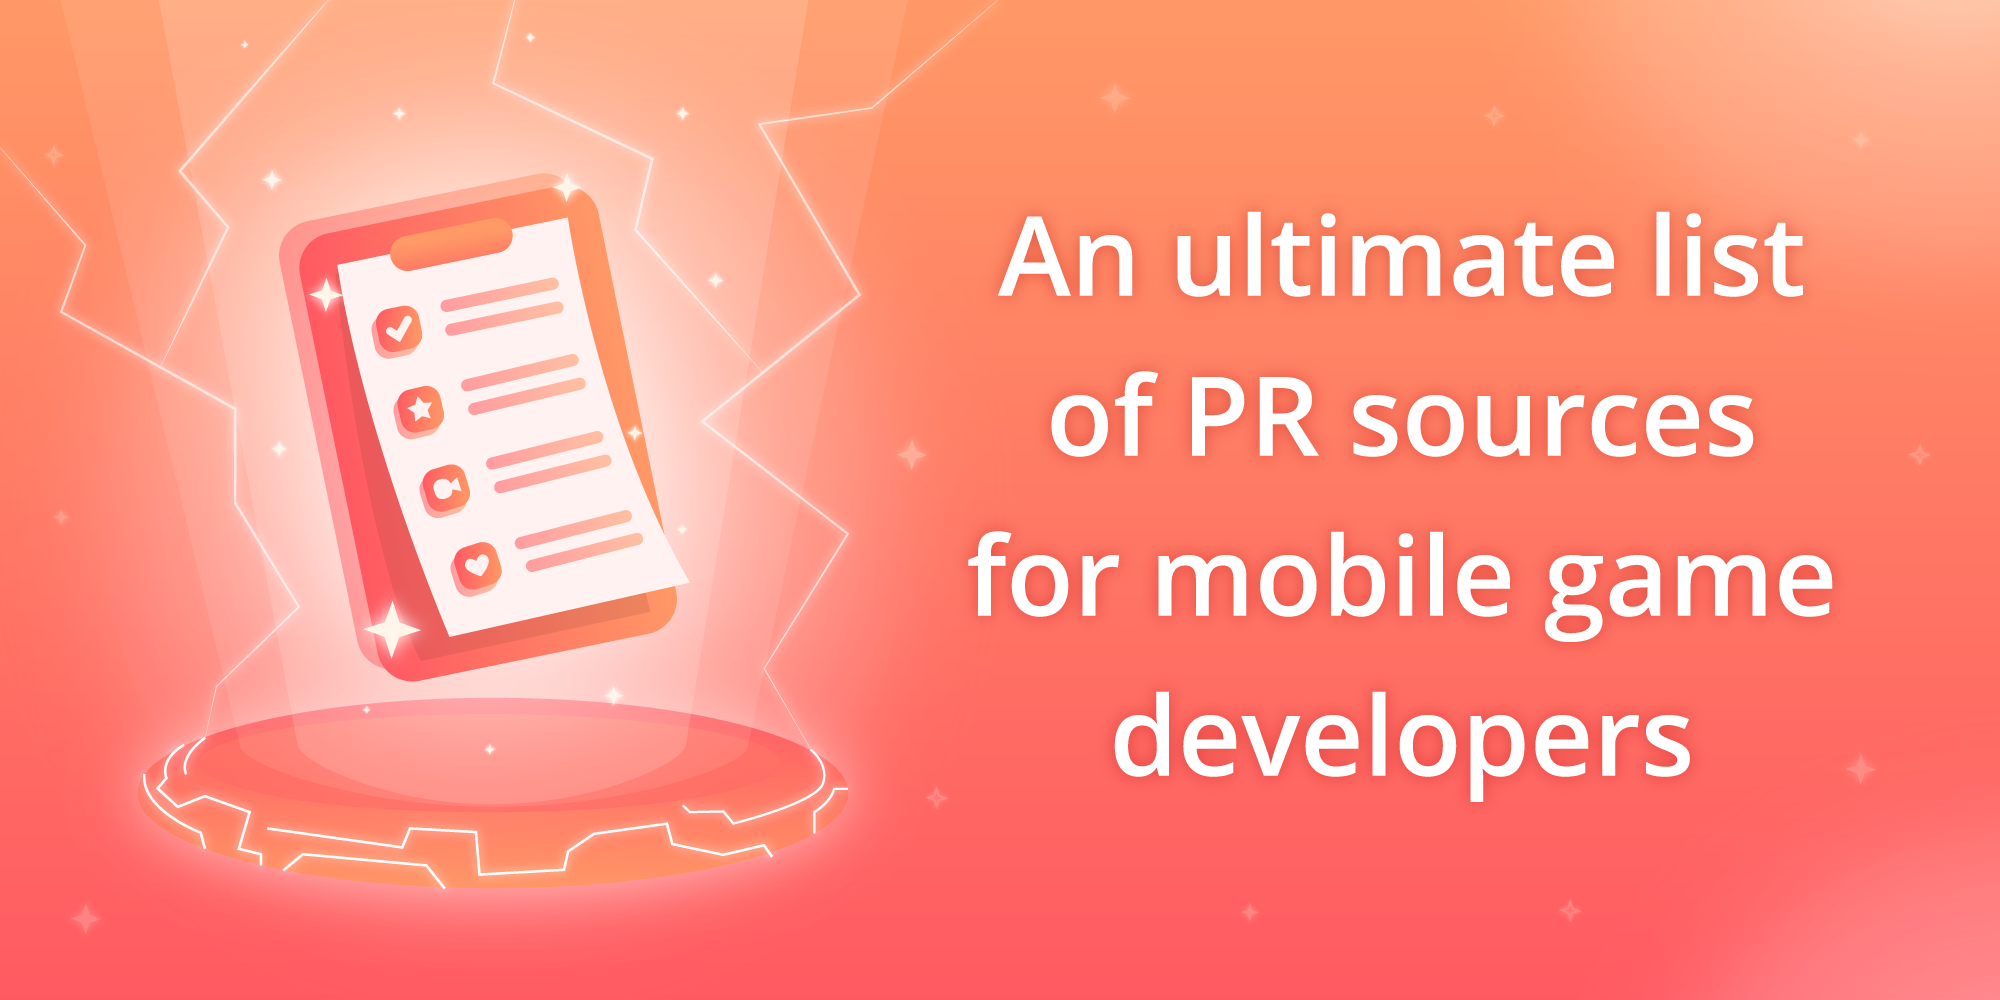 An ultimate list of the PR sources for mobile game developers